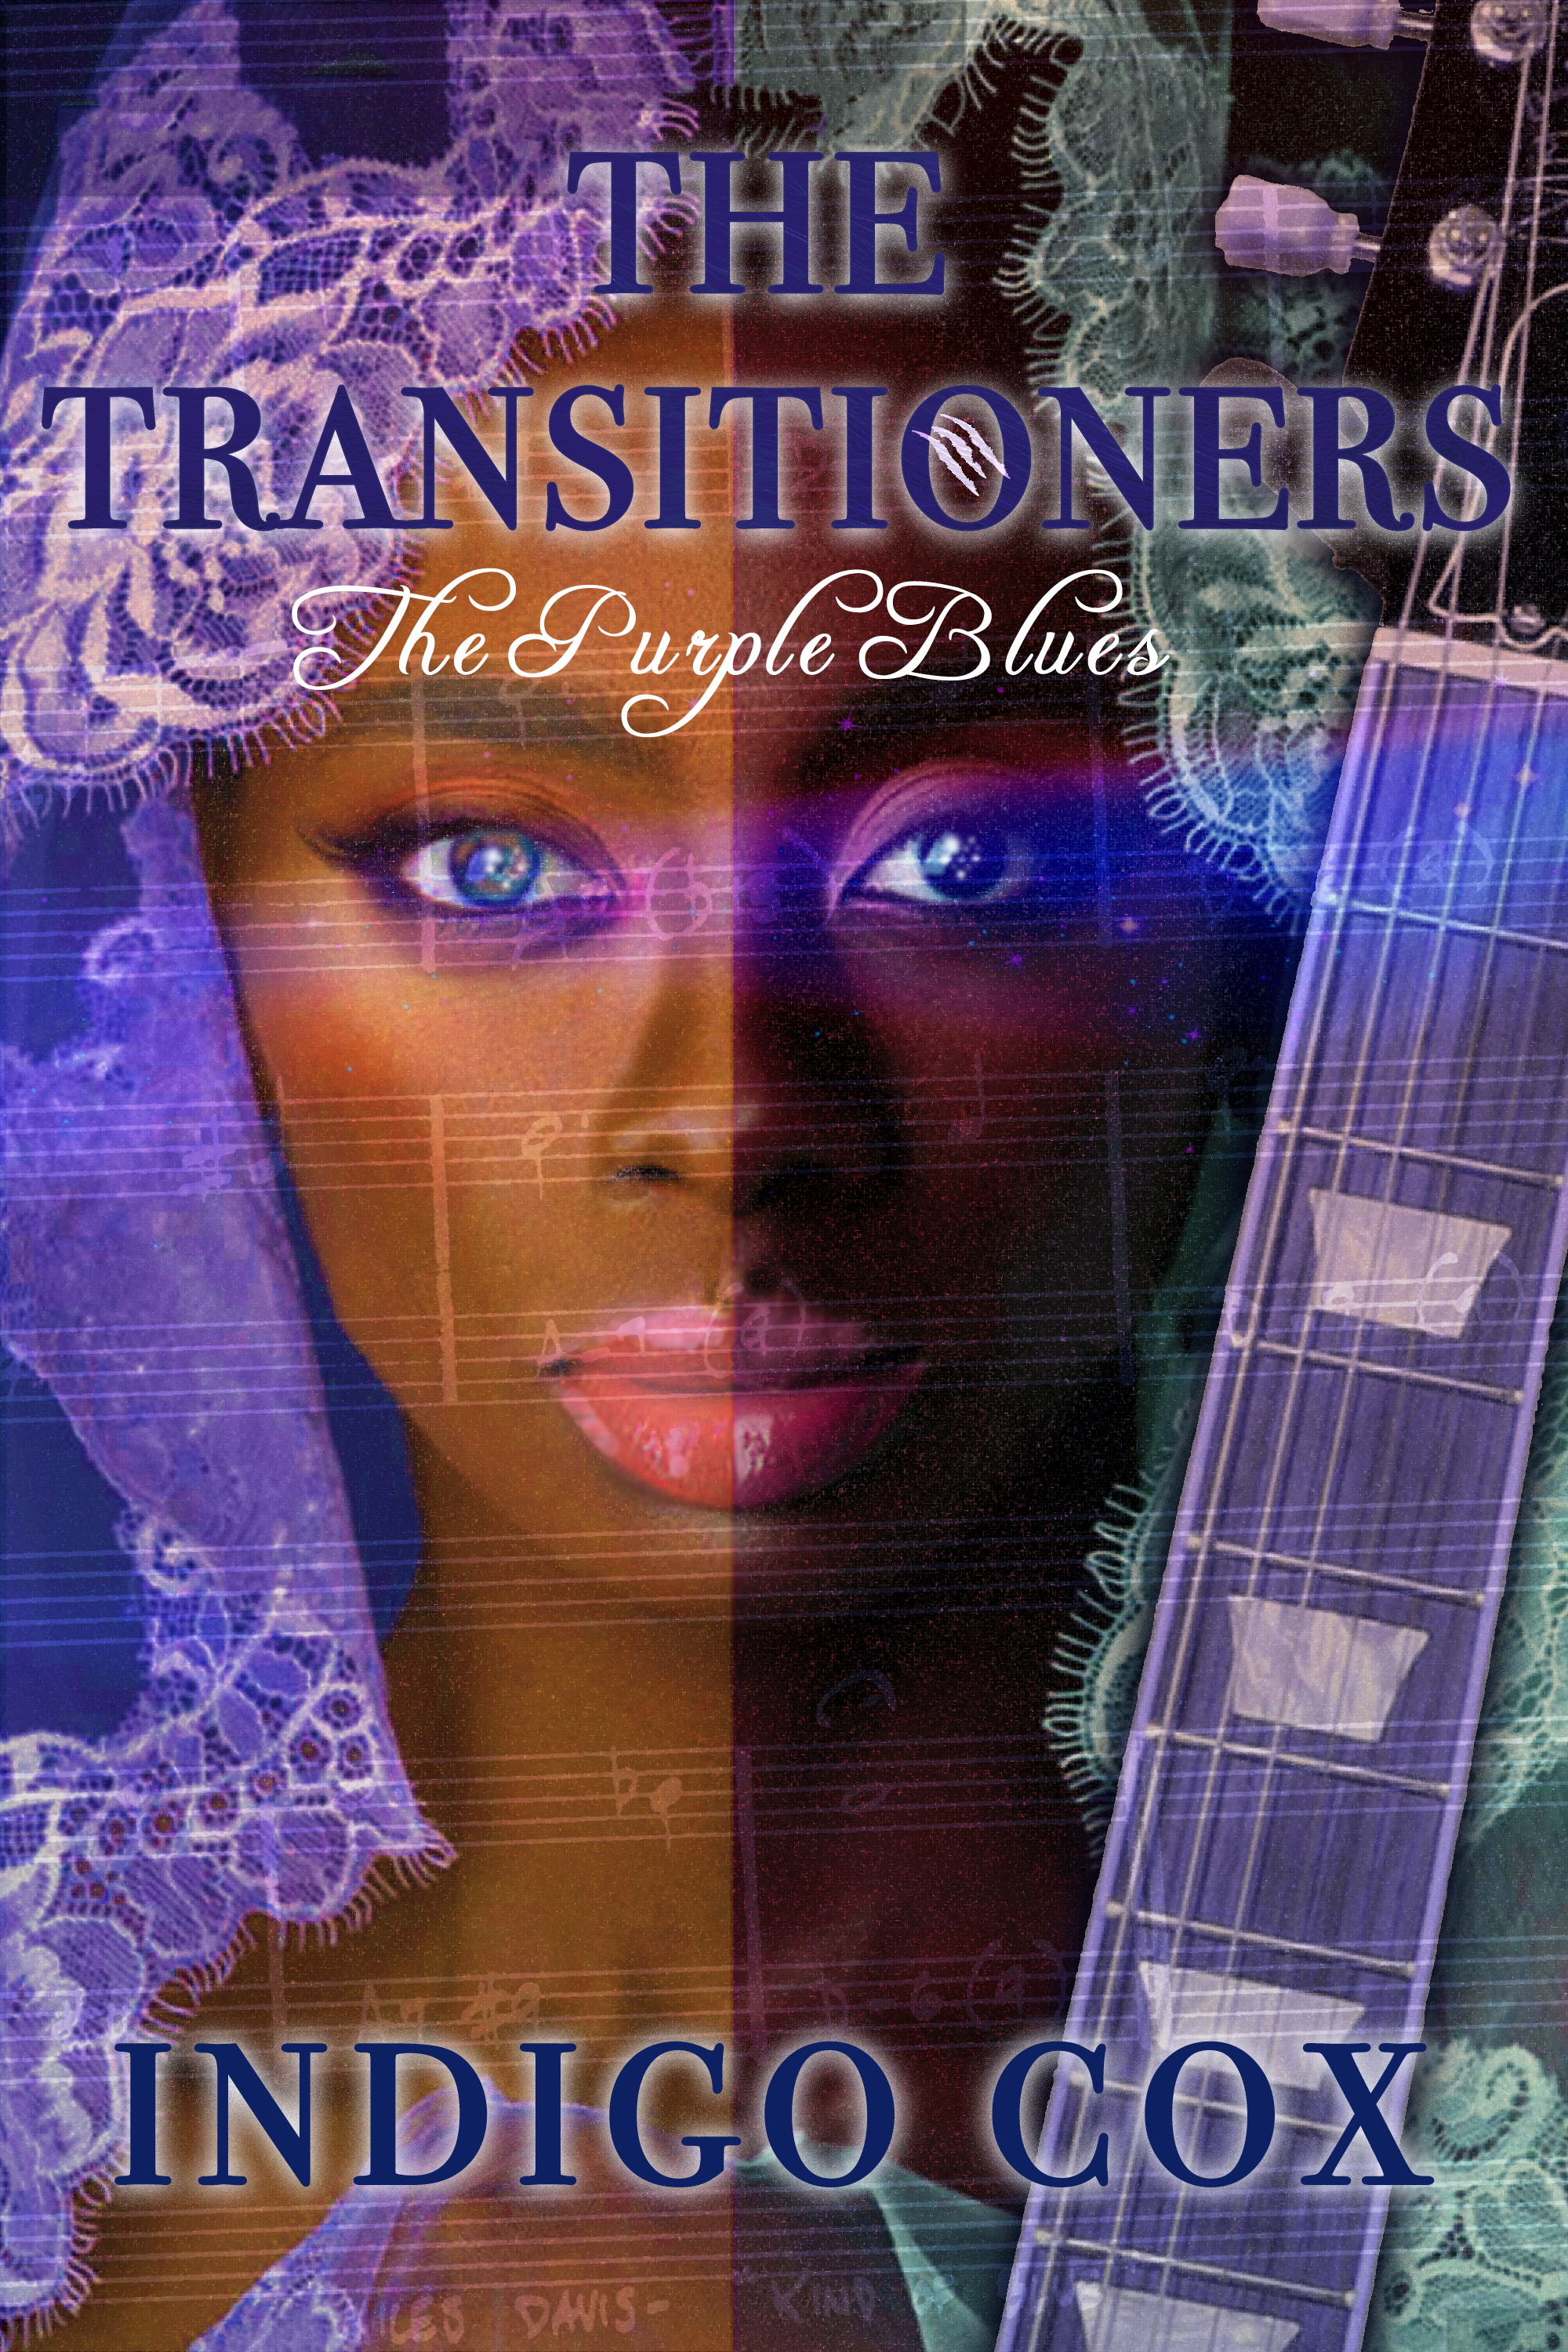 The Transitioners